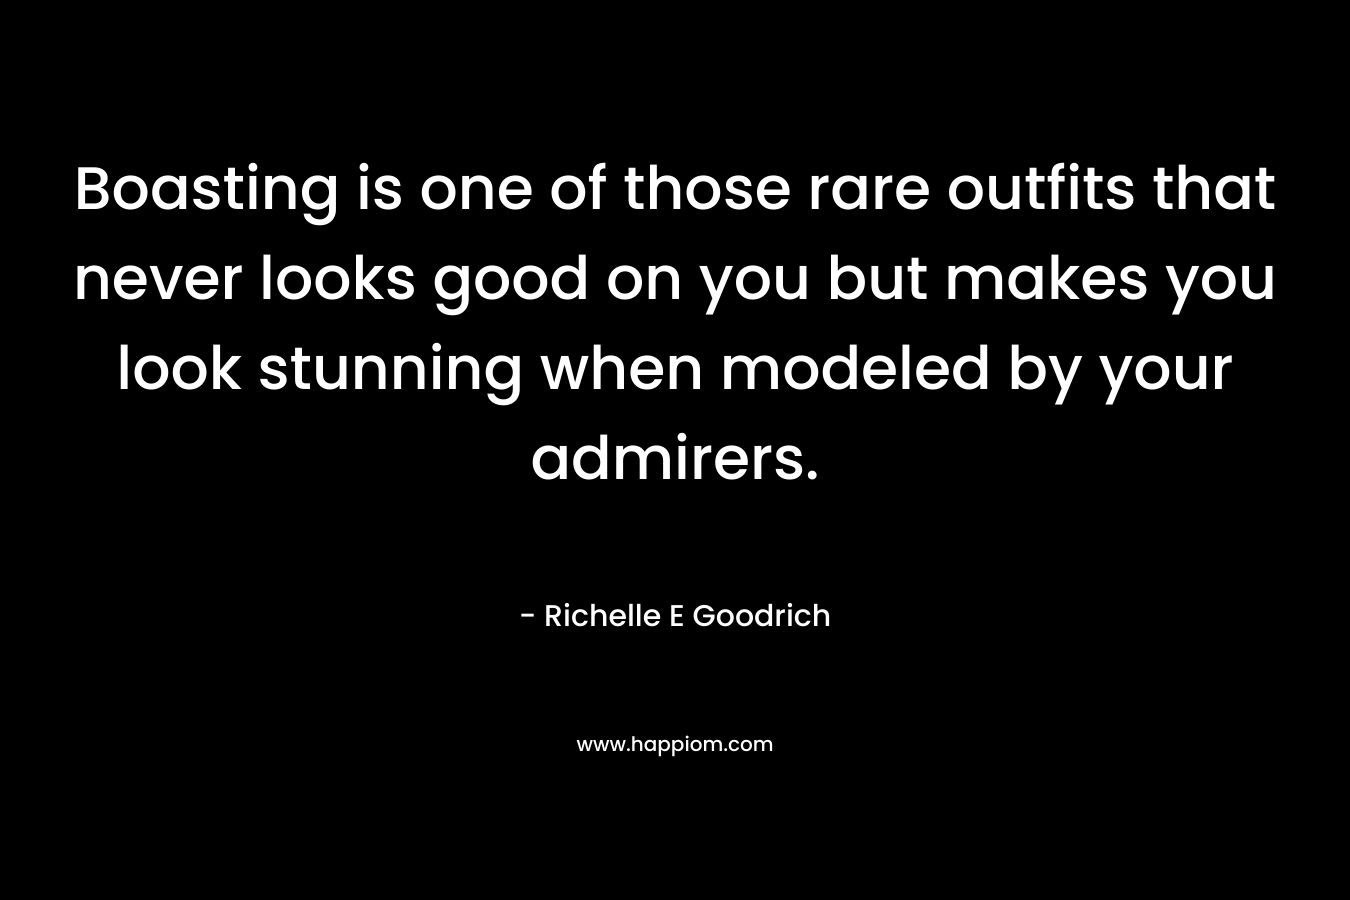 Boasting is one of those rare outfits that never looks good on you but makes you look stunning when modeled by your admirers.